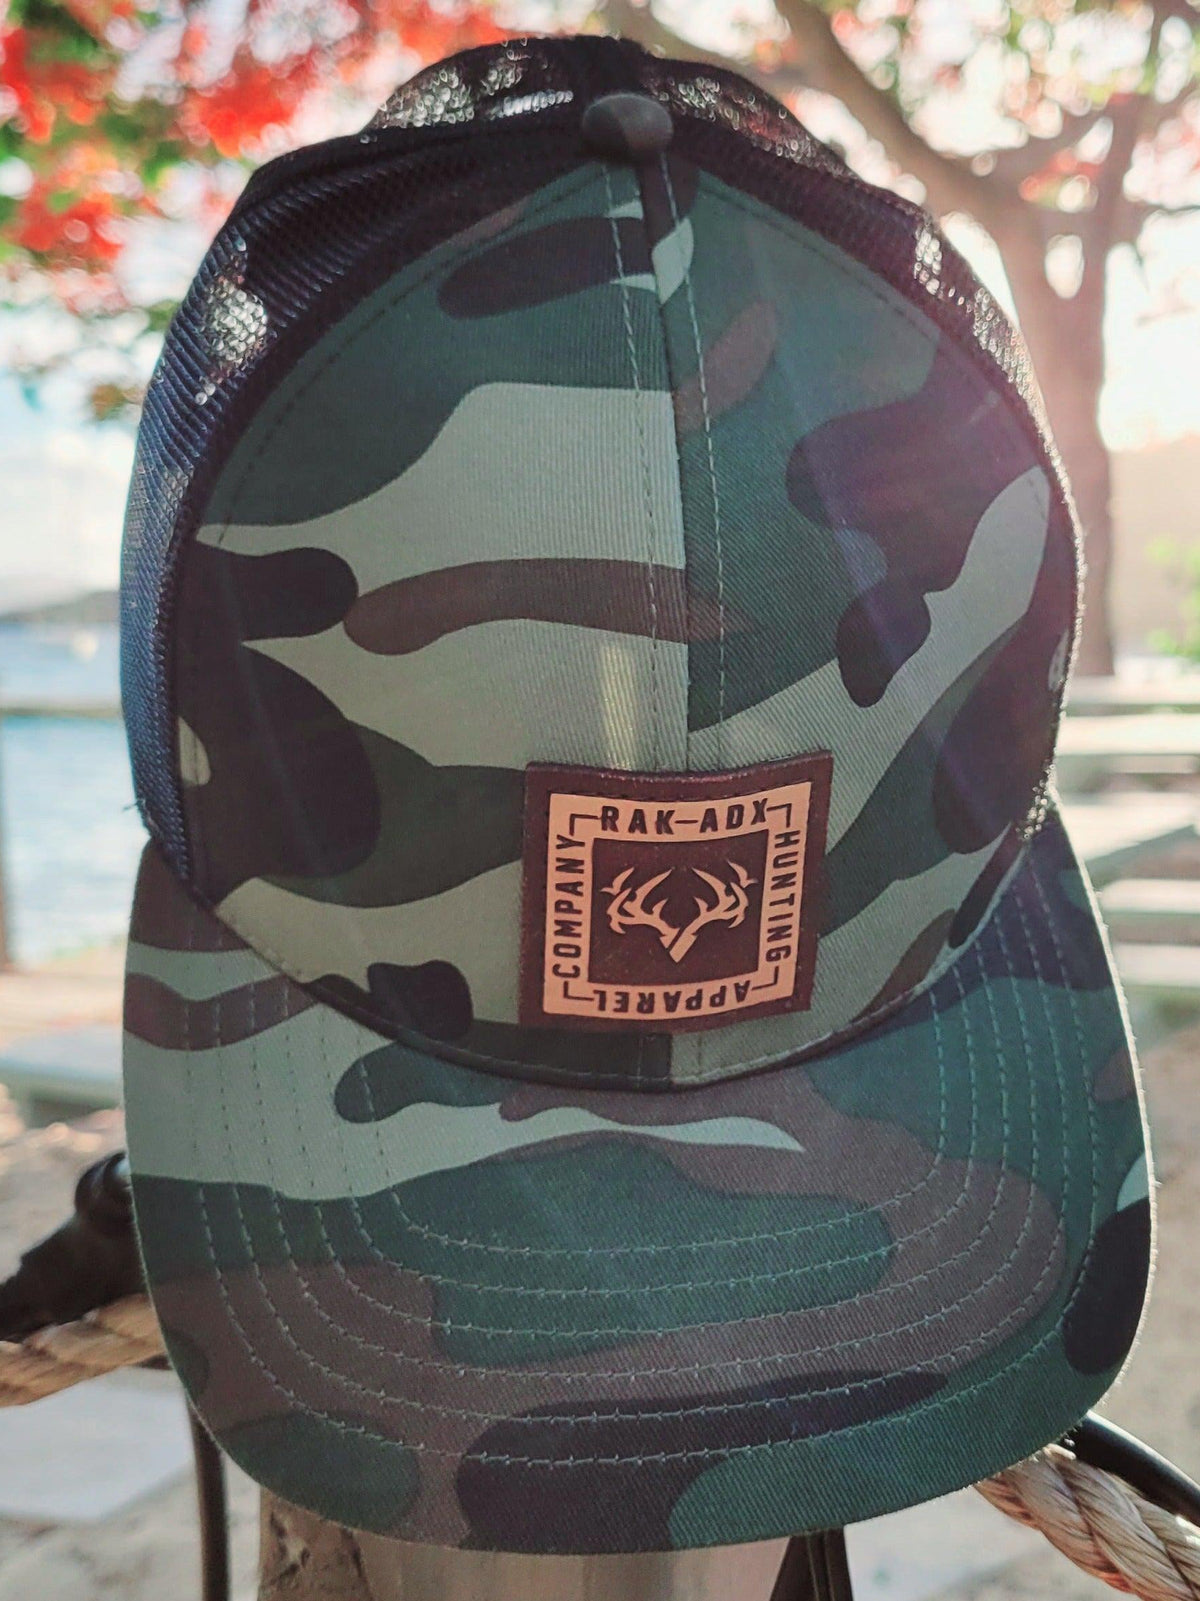 Delta Camo Leather Patch Trucker Hat